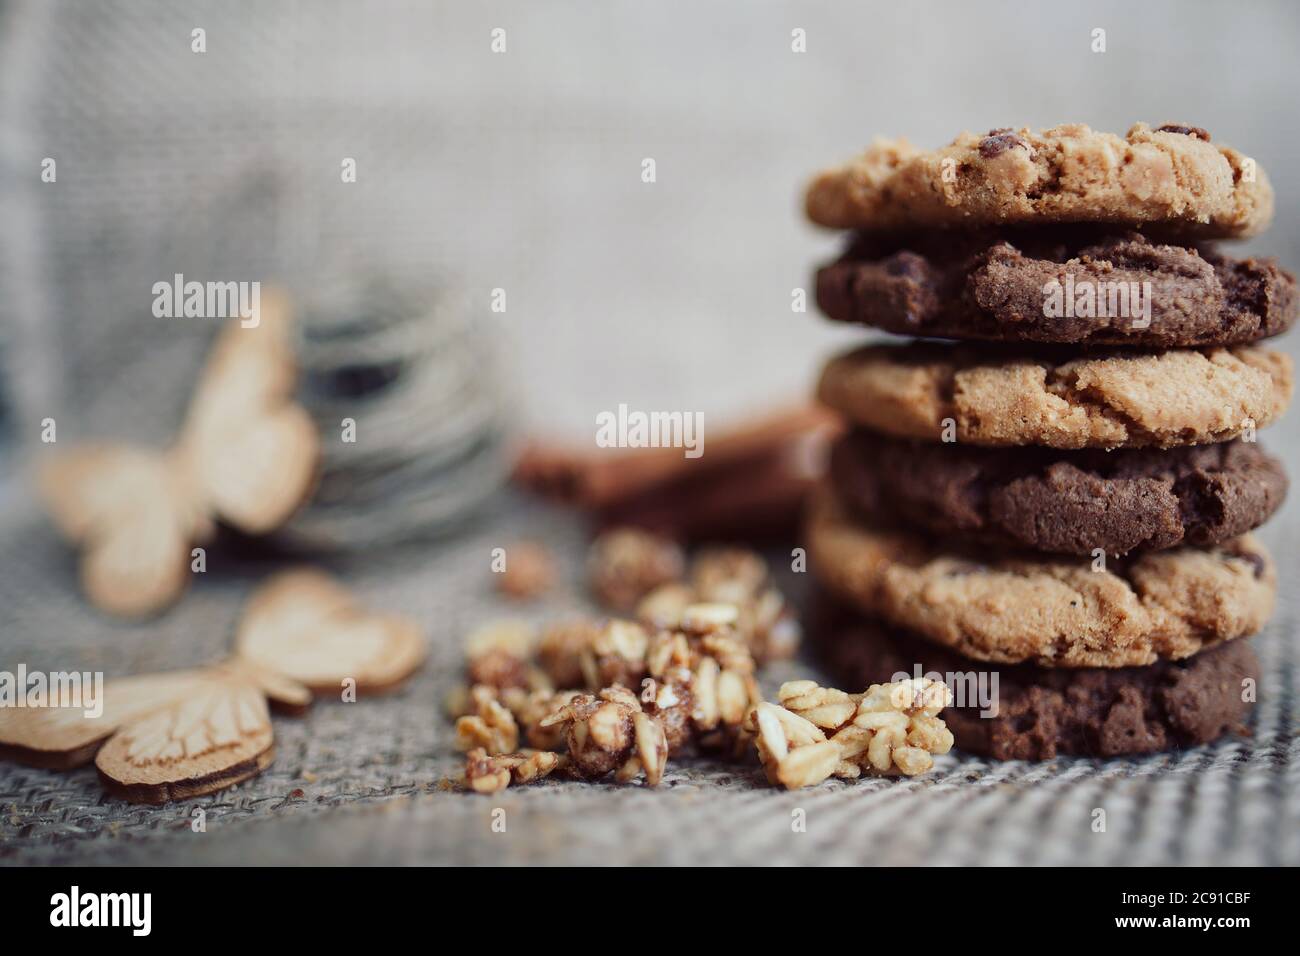 Homemade oatmeal cookies with cinnamon close-up . Healthy Food Snack. Stock Photo